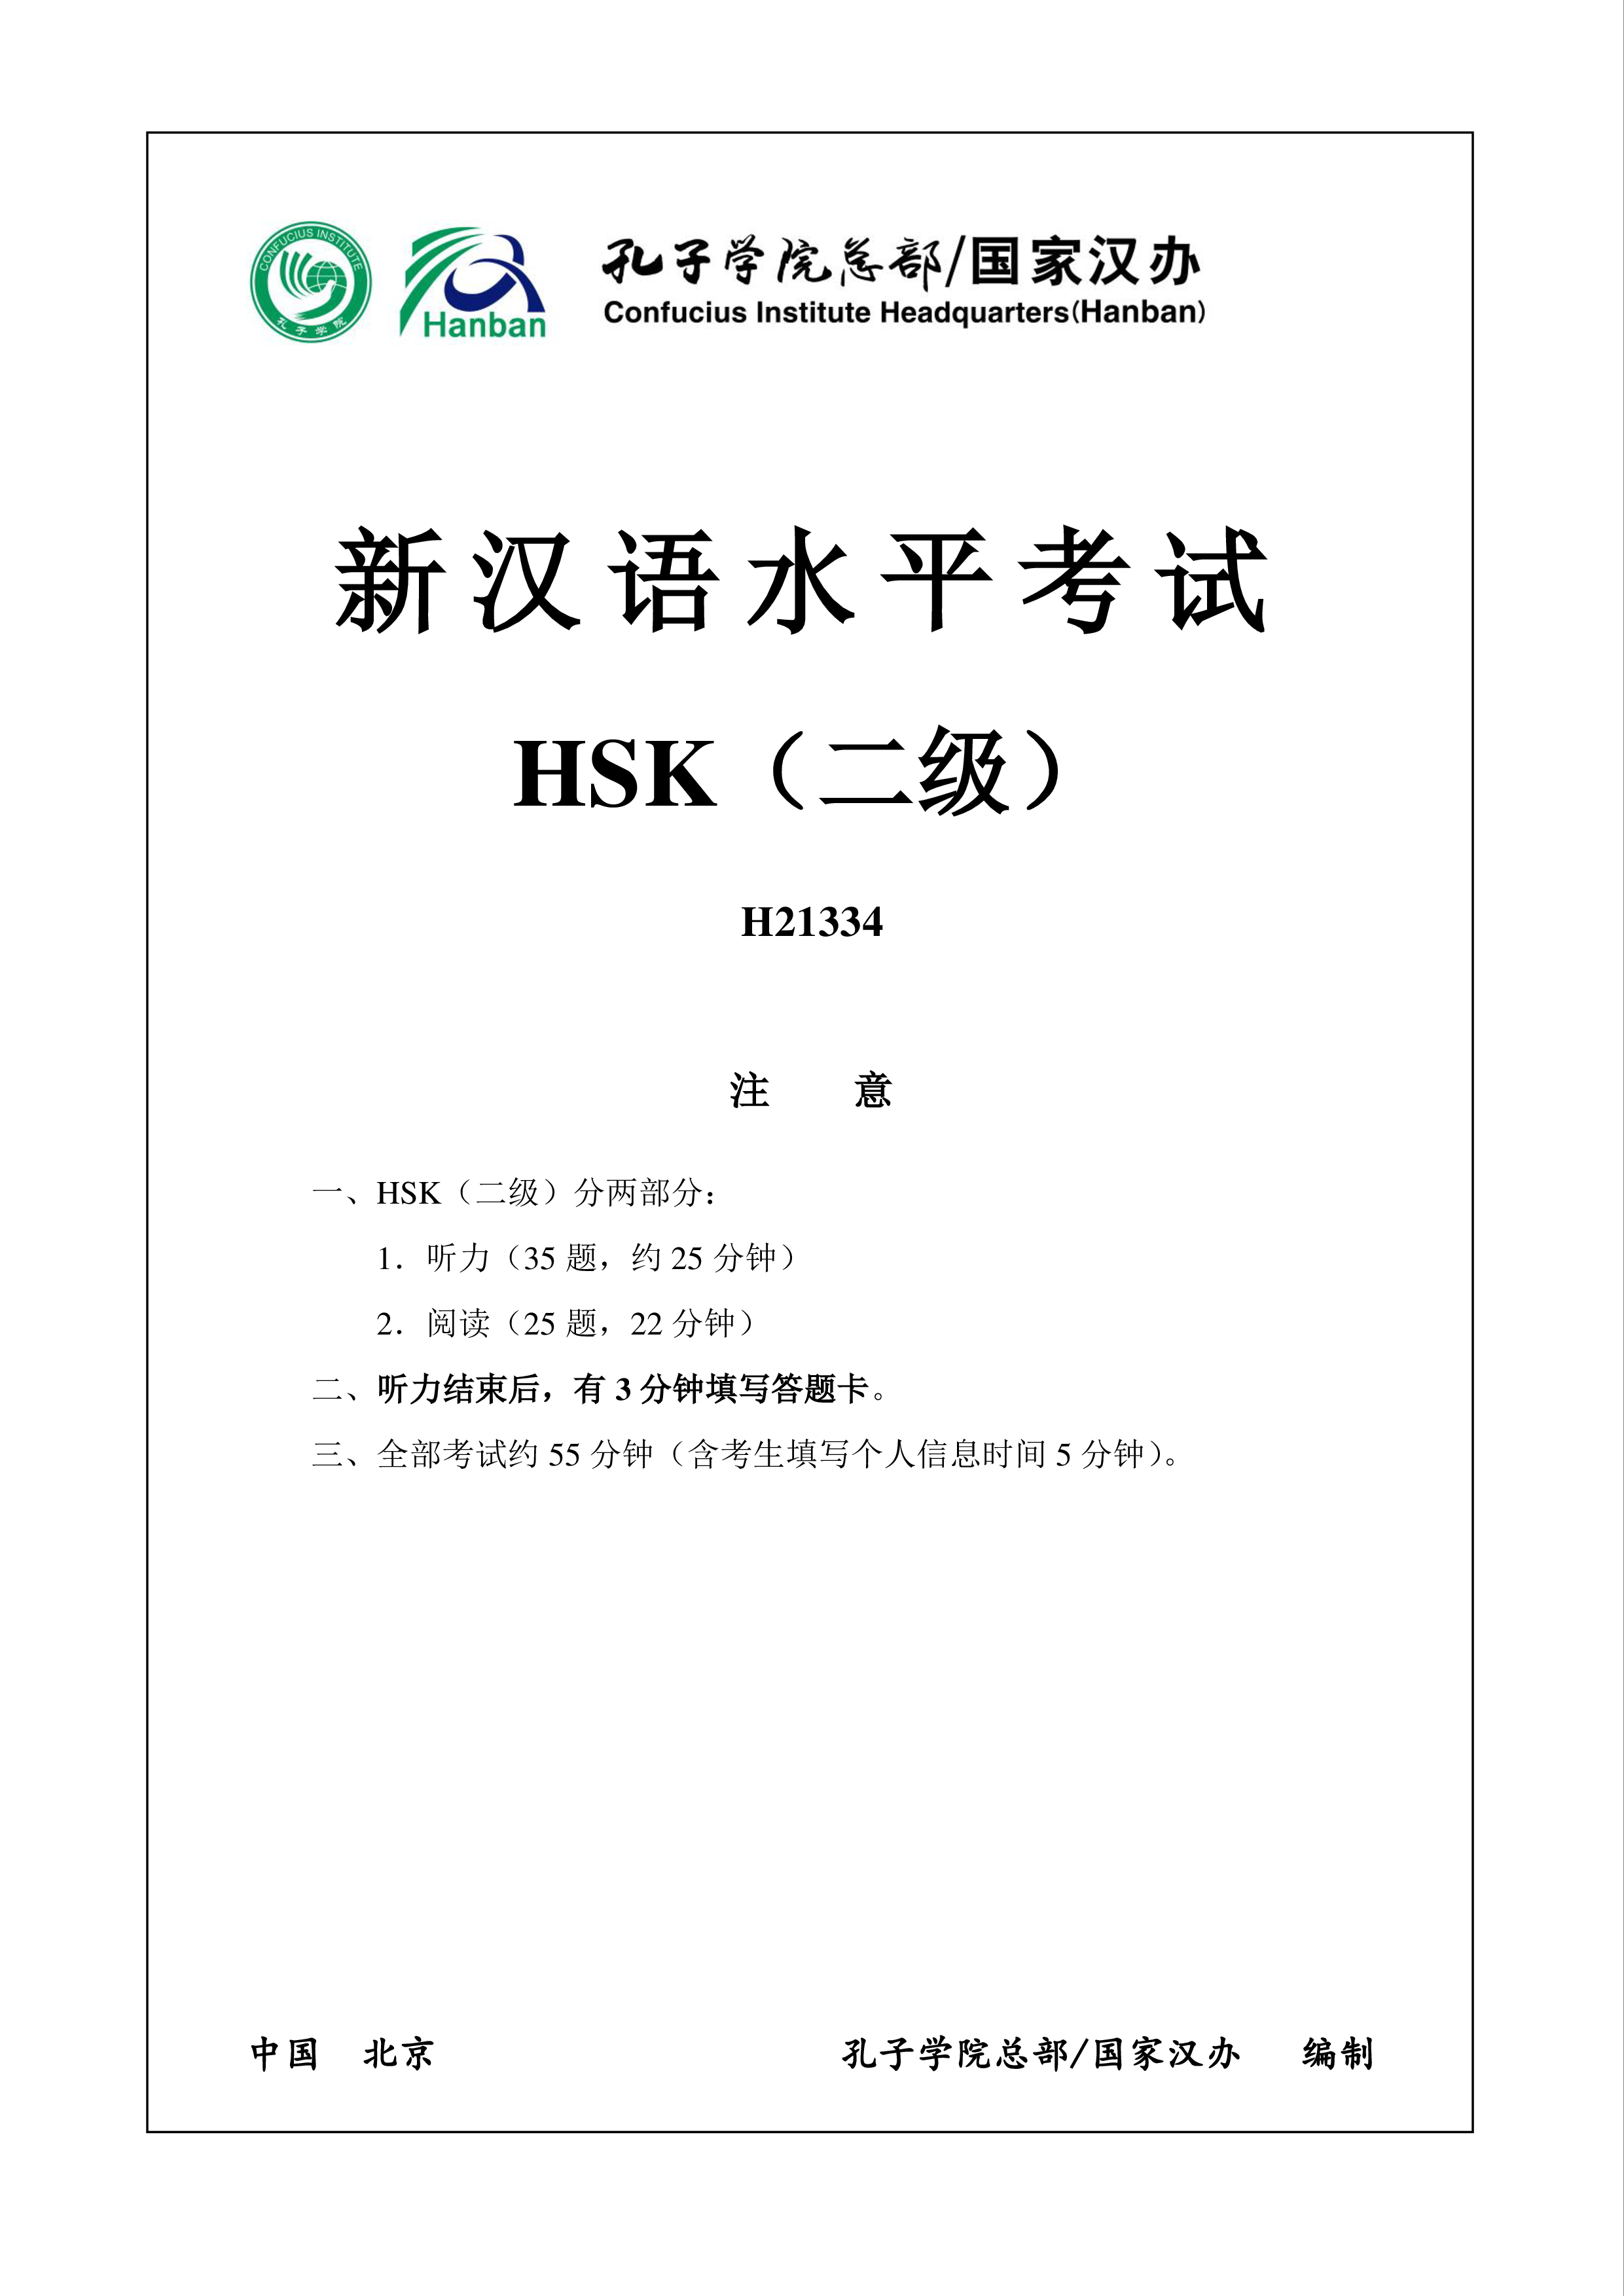 hsk2 chinese exam including answers # hsk2 h21334 voorbeeld afbeelding 